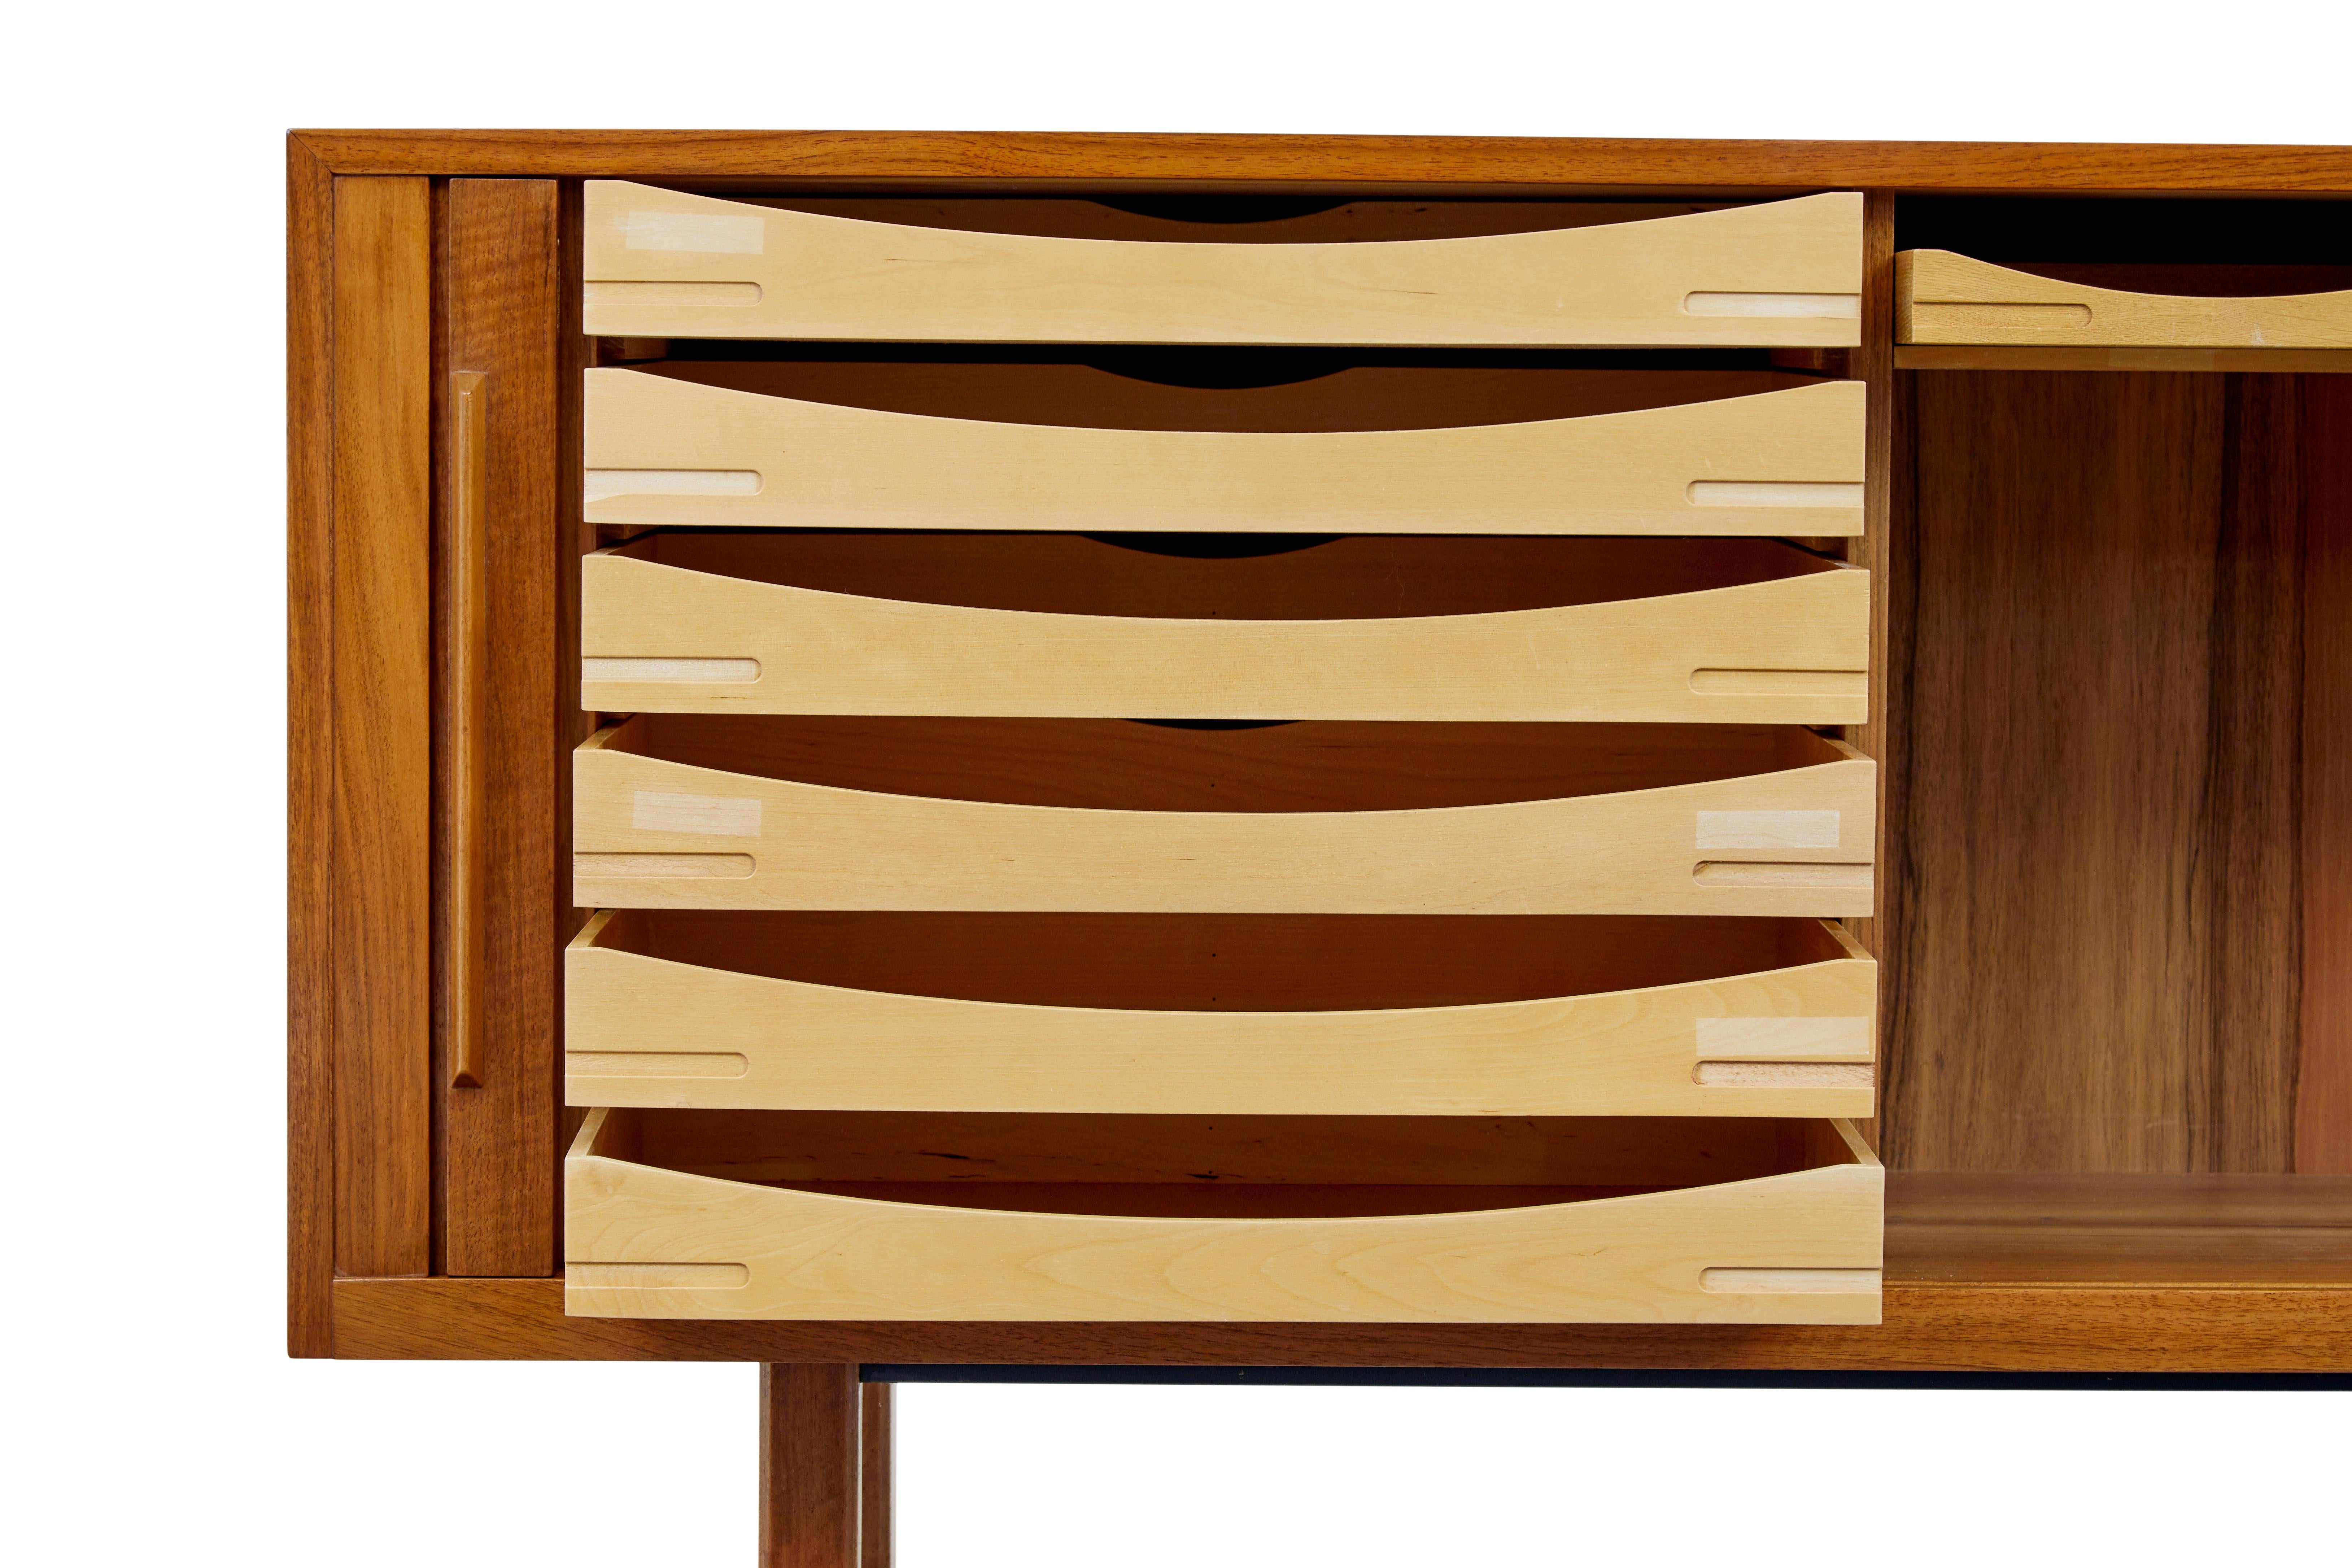 20th century Swedish teak tambour front sideboard by Atvidabergs In Good Condition For Sale In Debenham, Suffolk